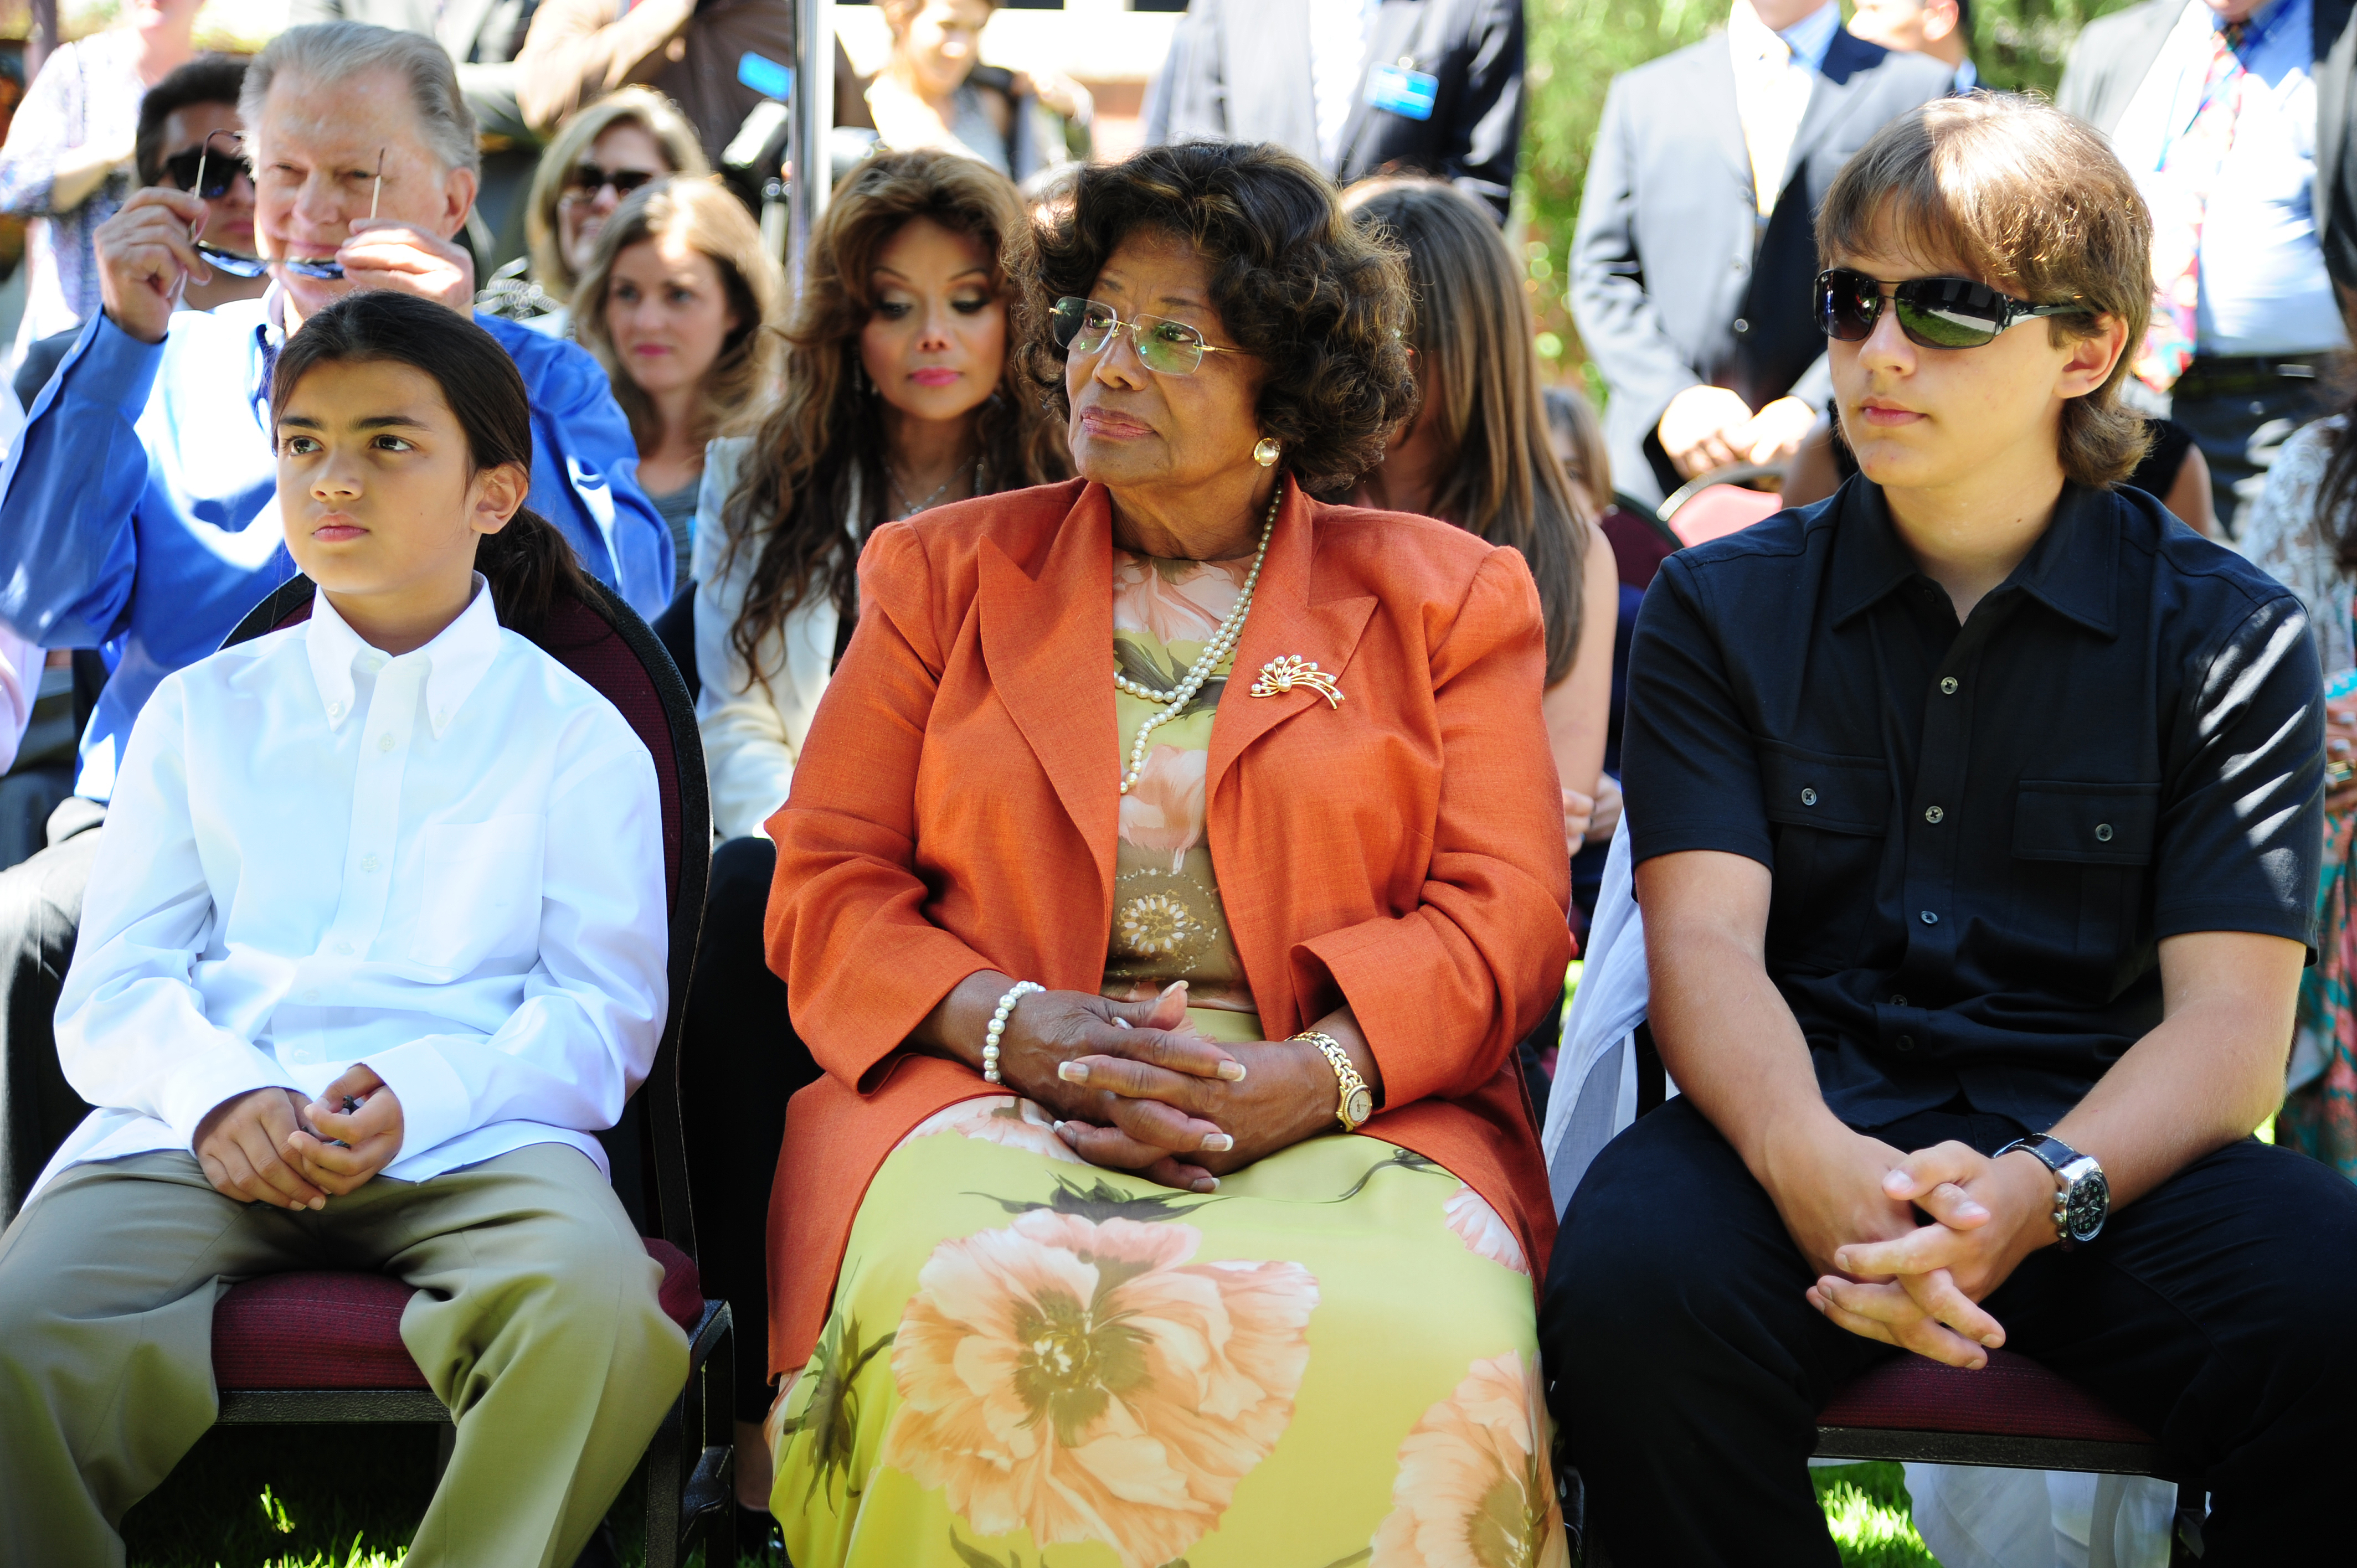 Bigi, Katherine, and Prince Jackson at a ceremony honoring Michael Jackson at Children's Hospital in Los Angeles, California on August 8, 2011. | Source: Getty Images